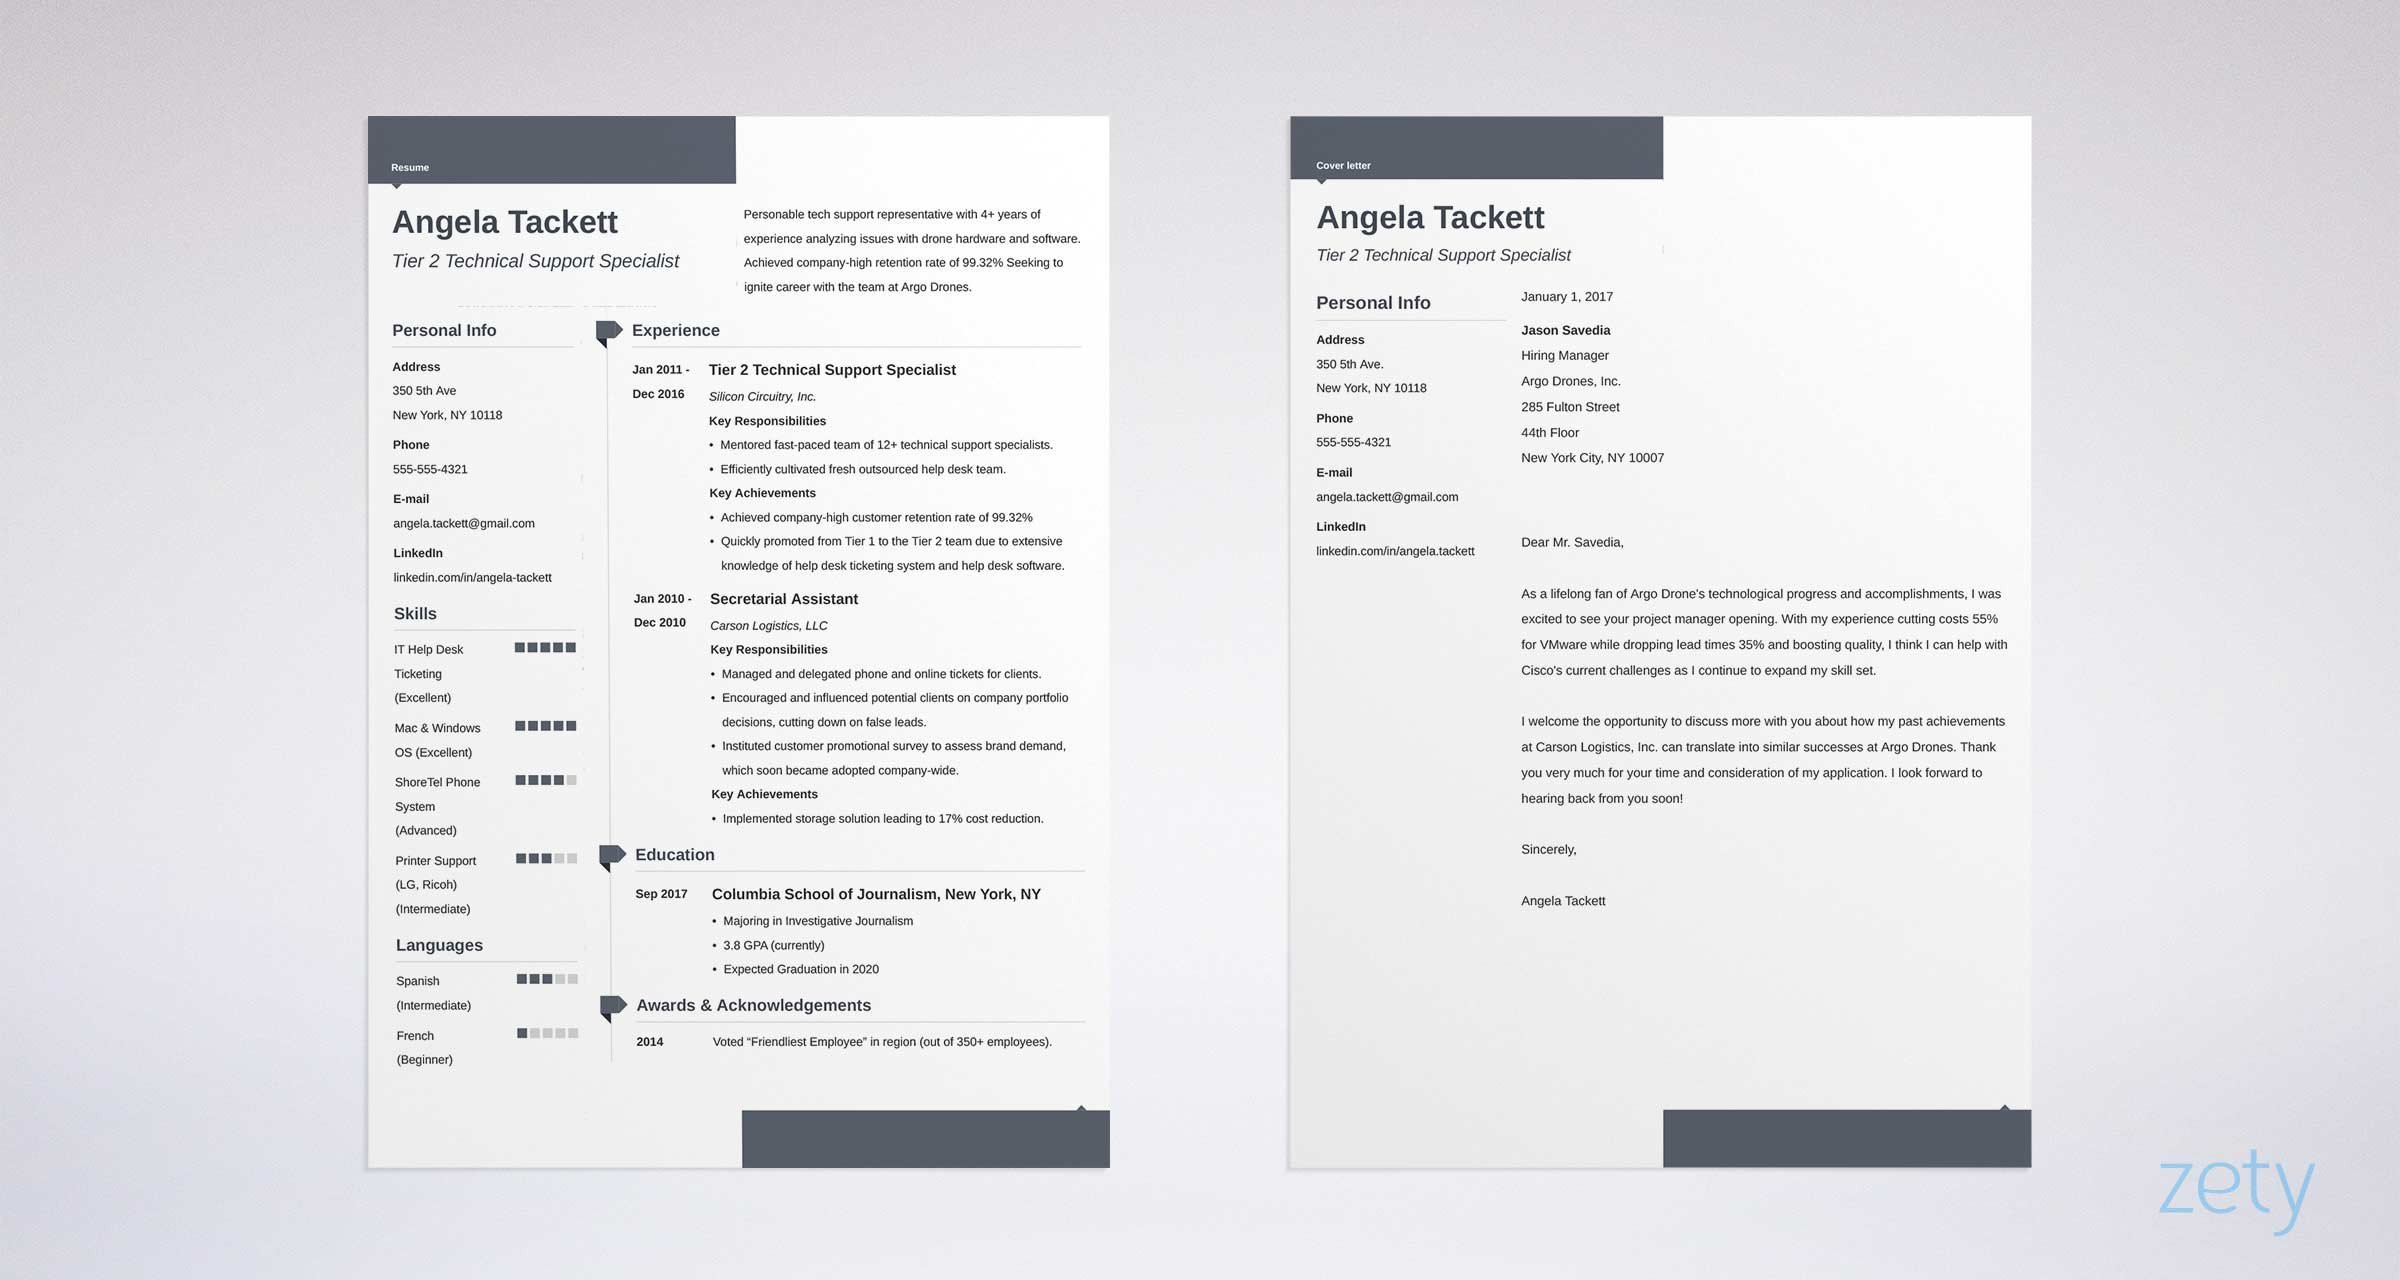 Free Resume Templates Downloads with No Fees 25lancarrezekiq Free Resume Templates to Download In 2022 [all formats]